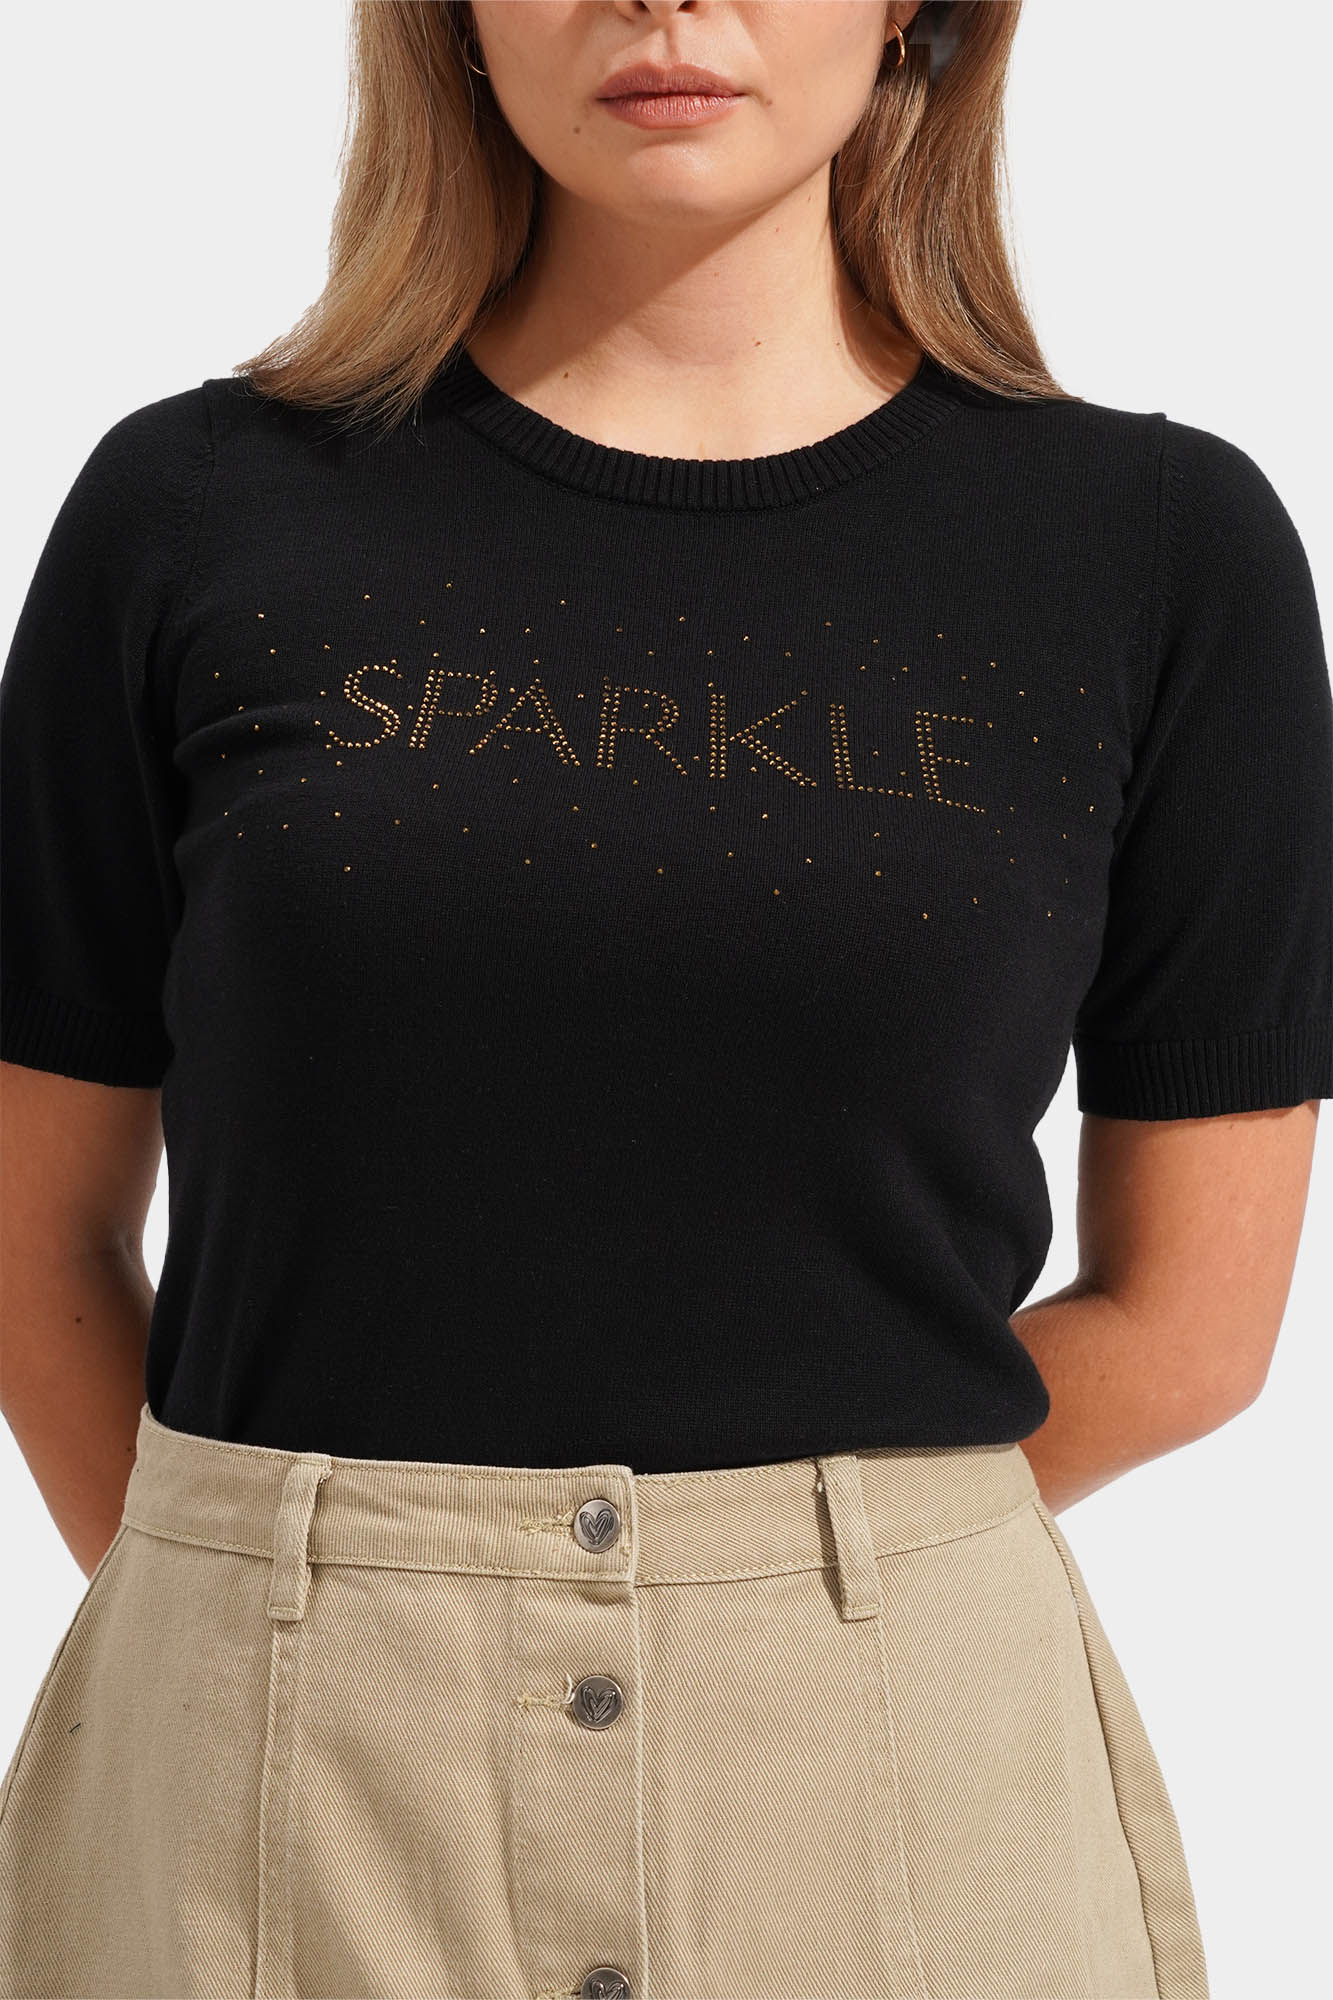 Sparkle Flat Knit Graphic Tee